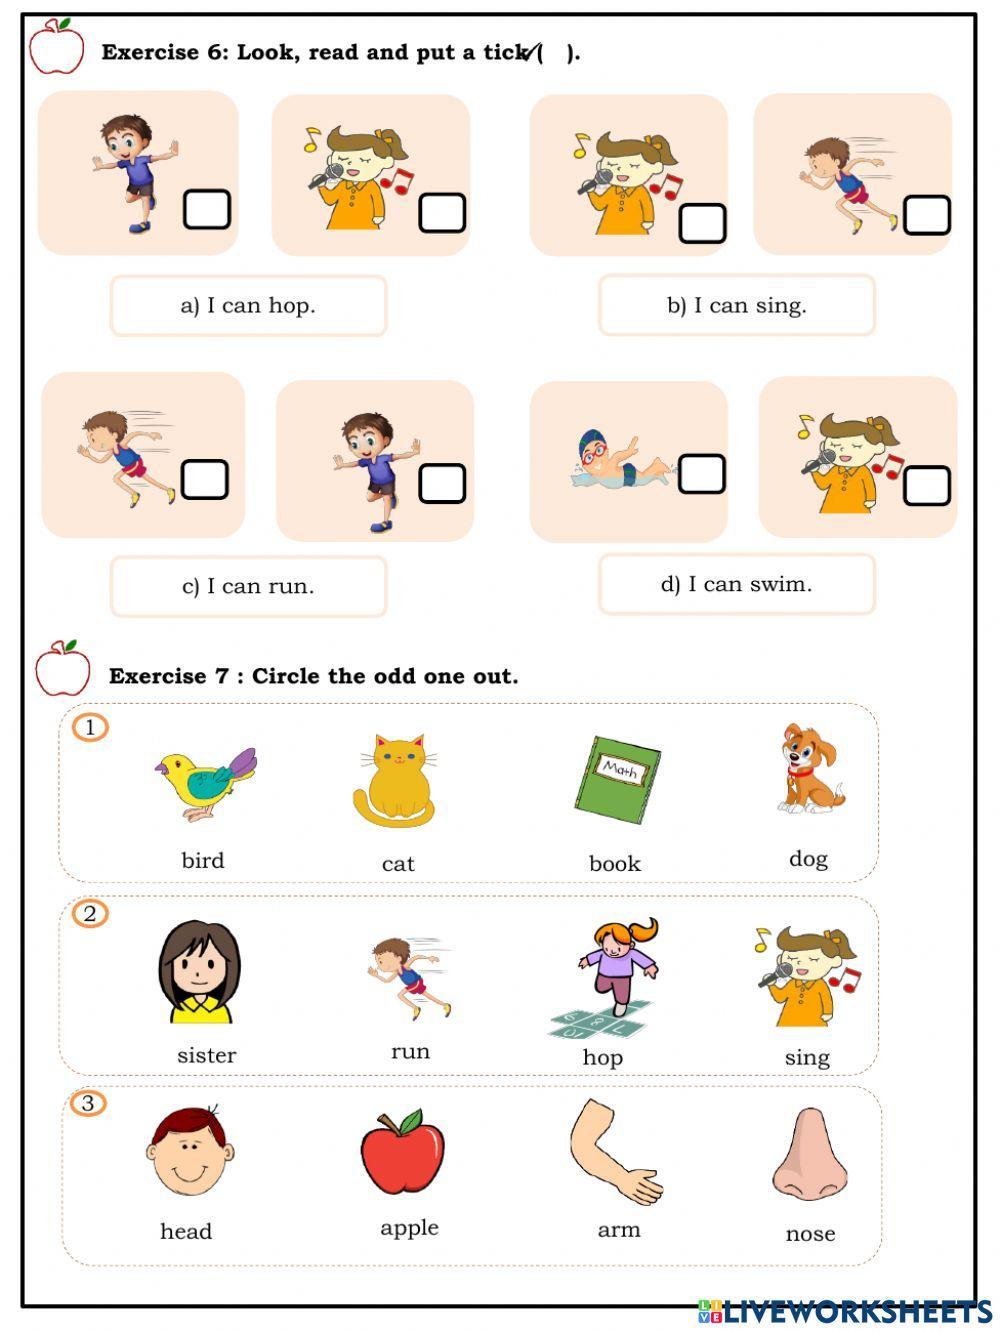 Review Unit 6 - I learn smart start grade 1- Ms Sunny